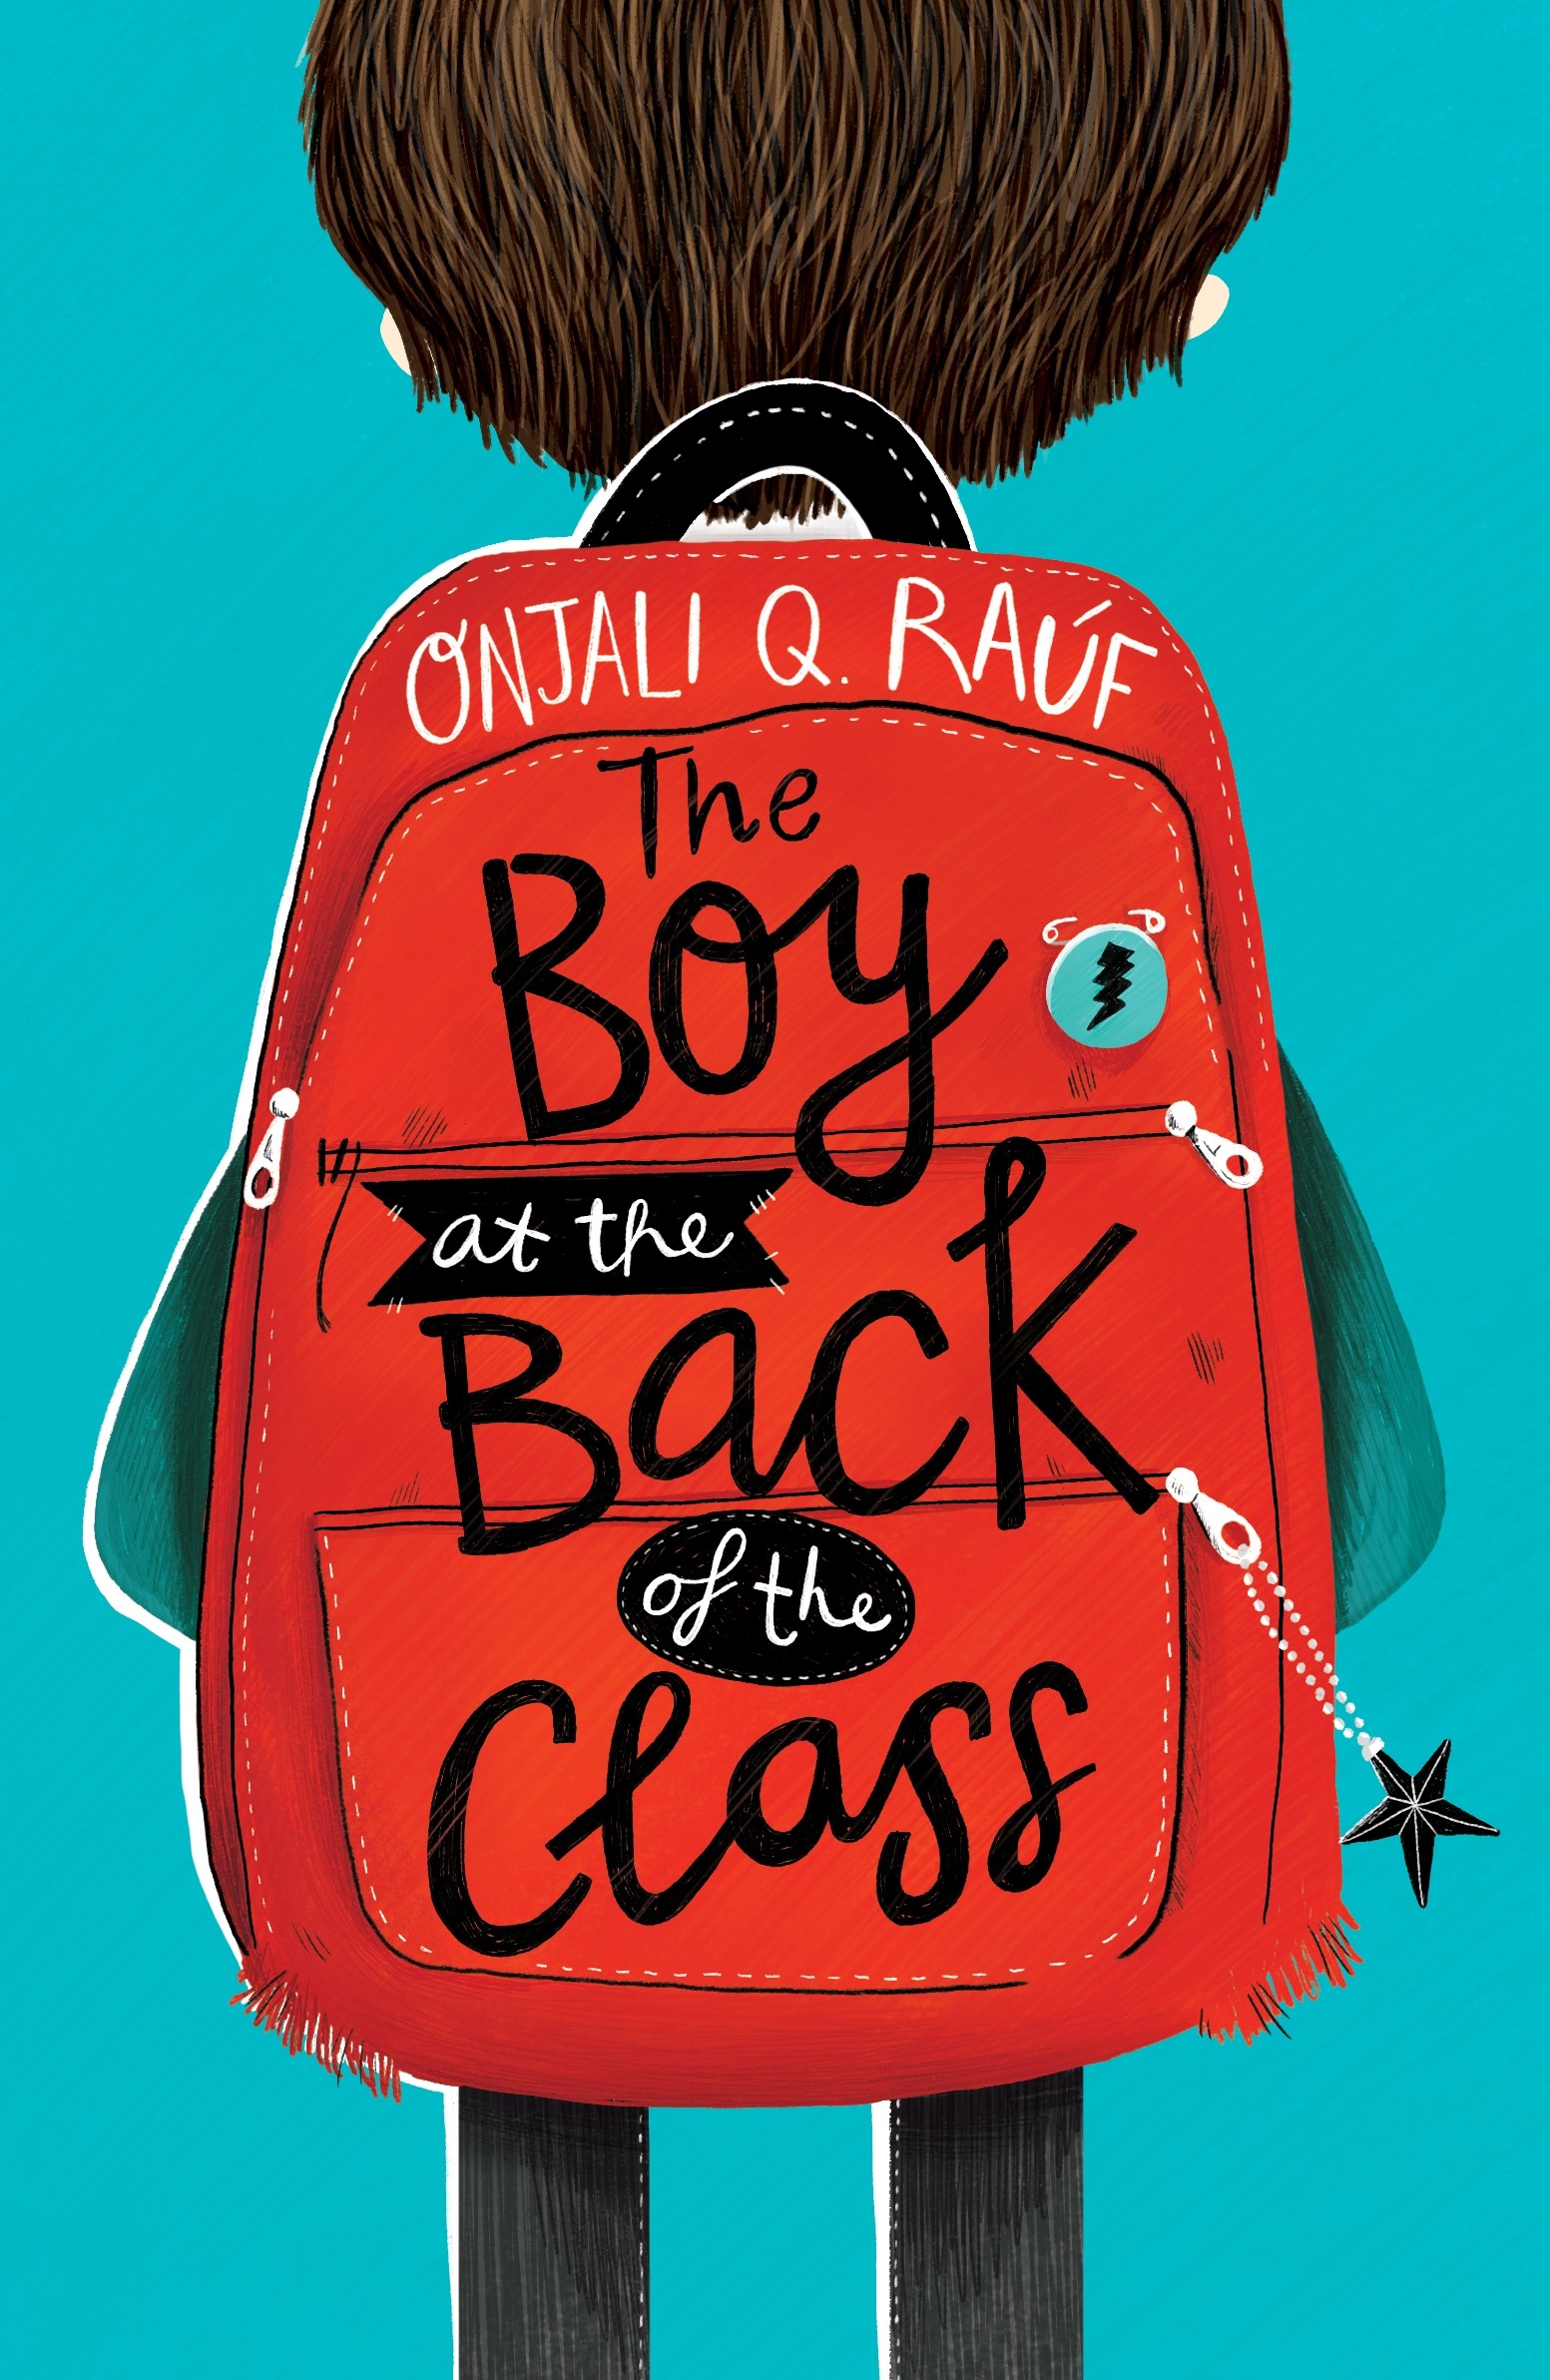 The Boy at the Back of the Class is published by Orion Children's Books